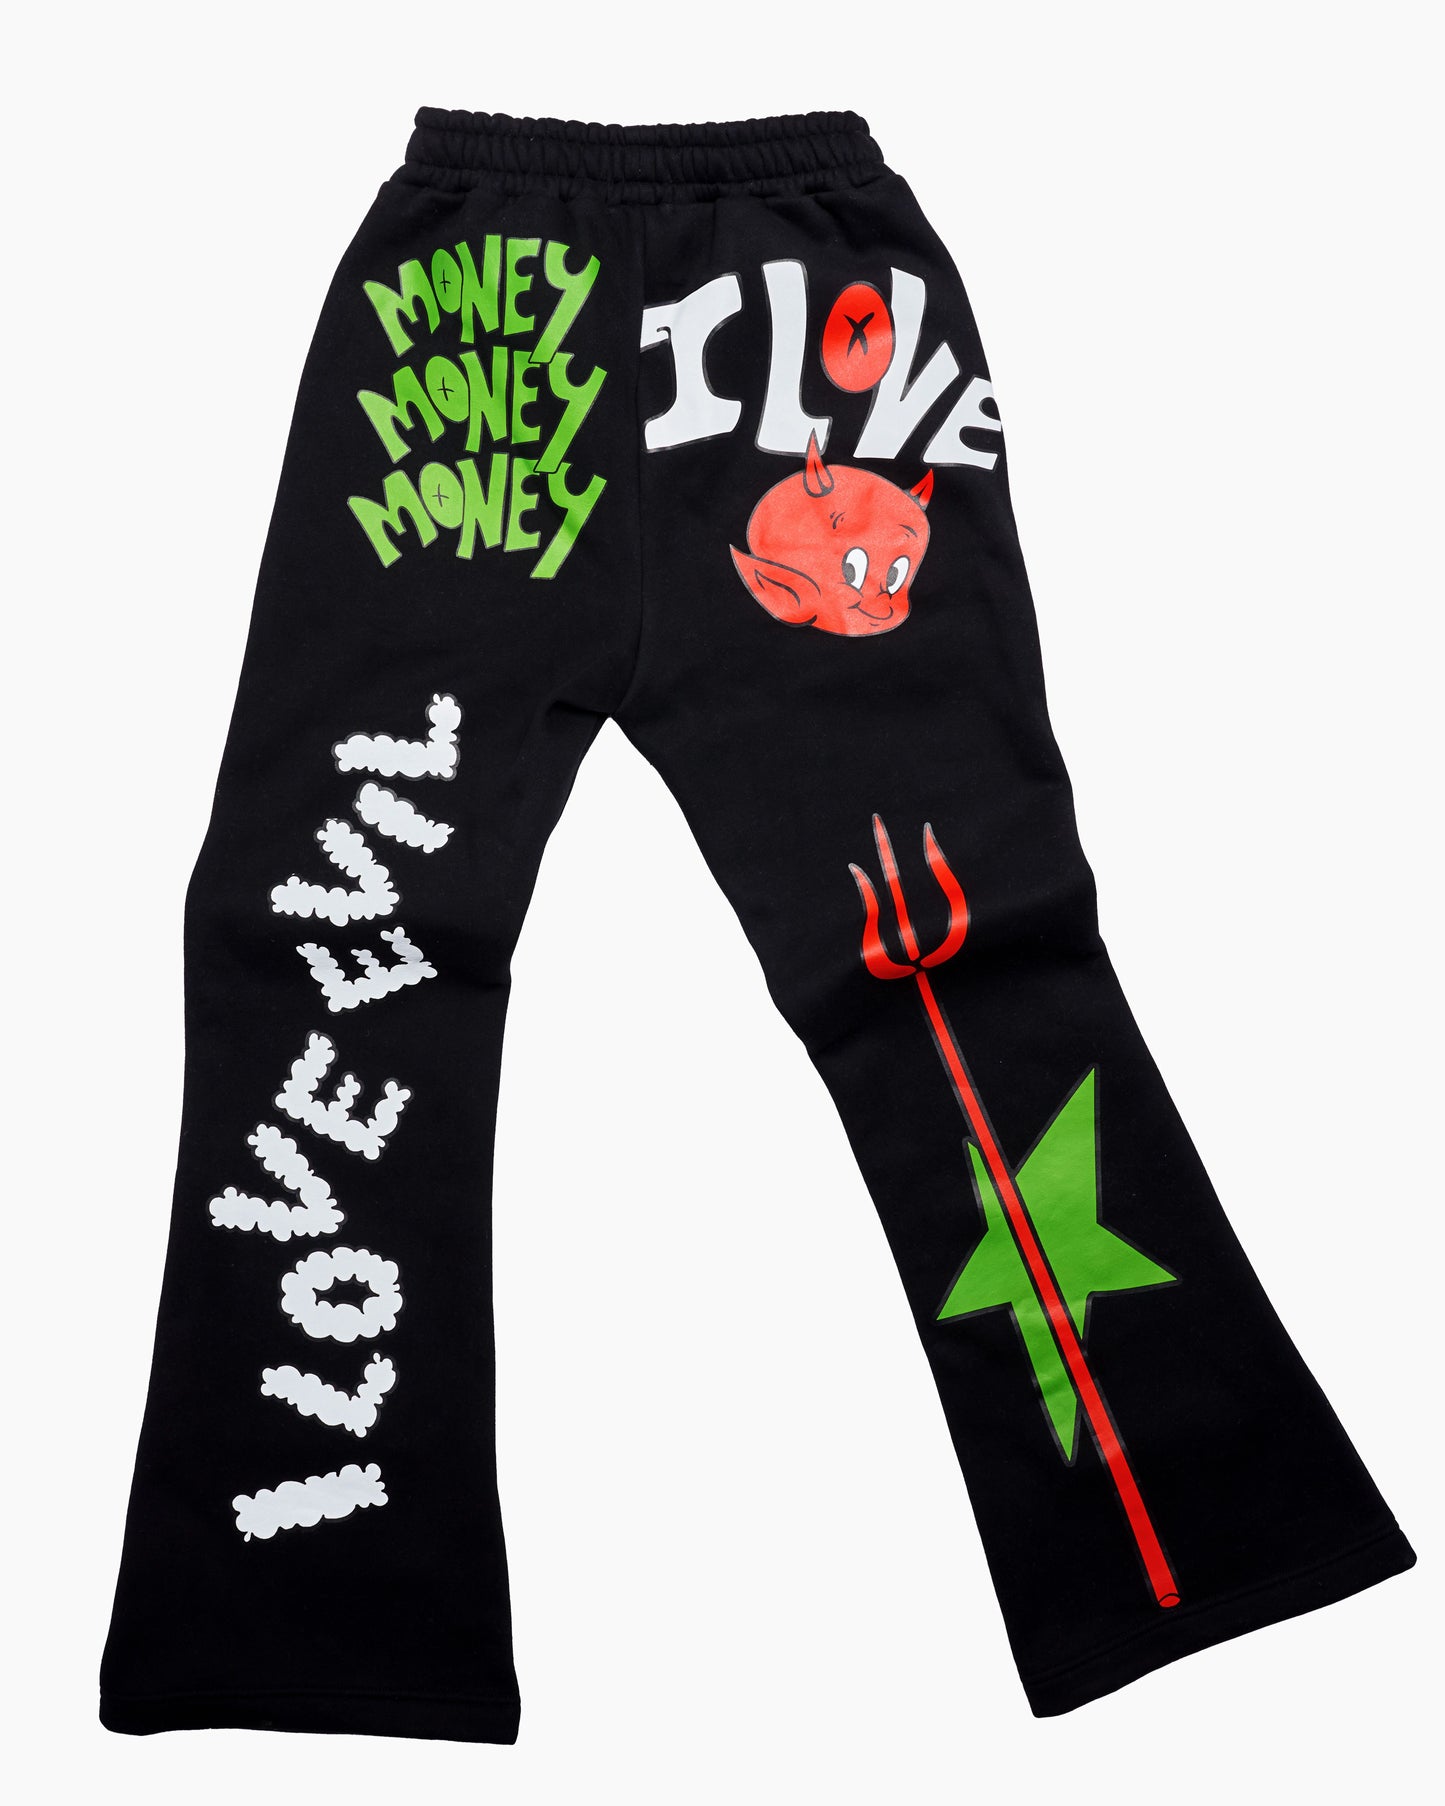 Money Is The Root Of All Evil Jumpsuit Set (Black)